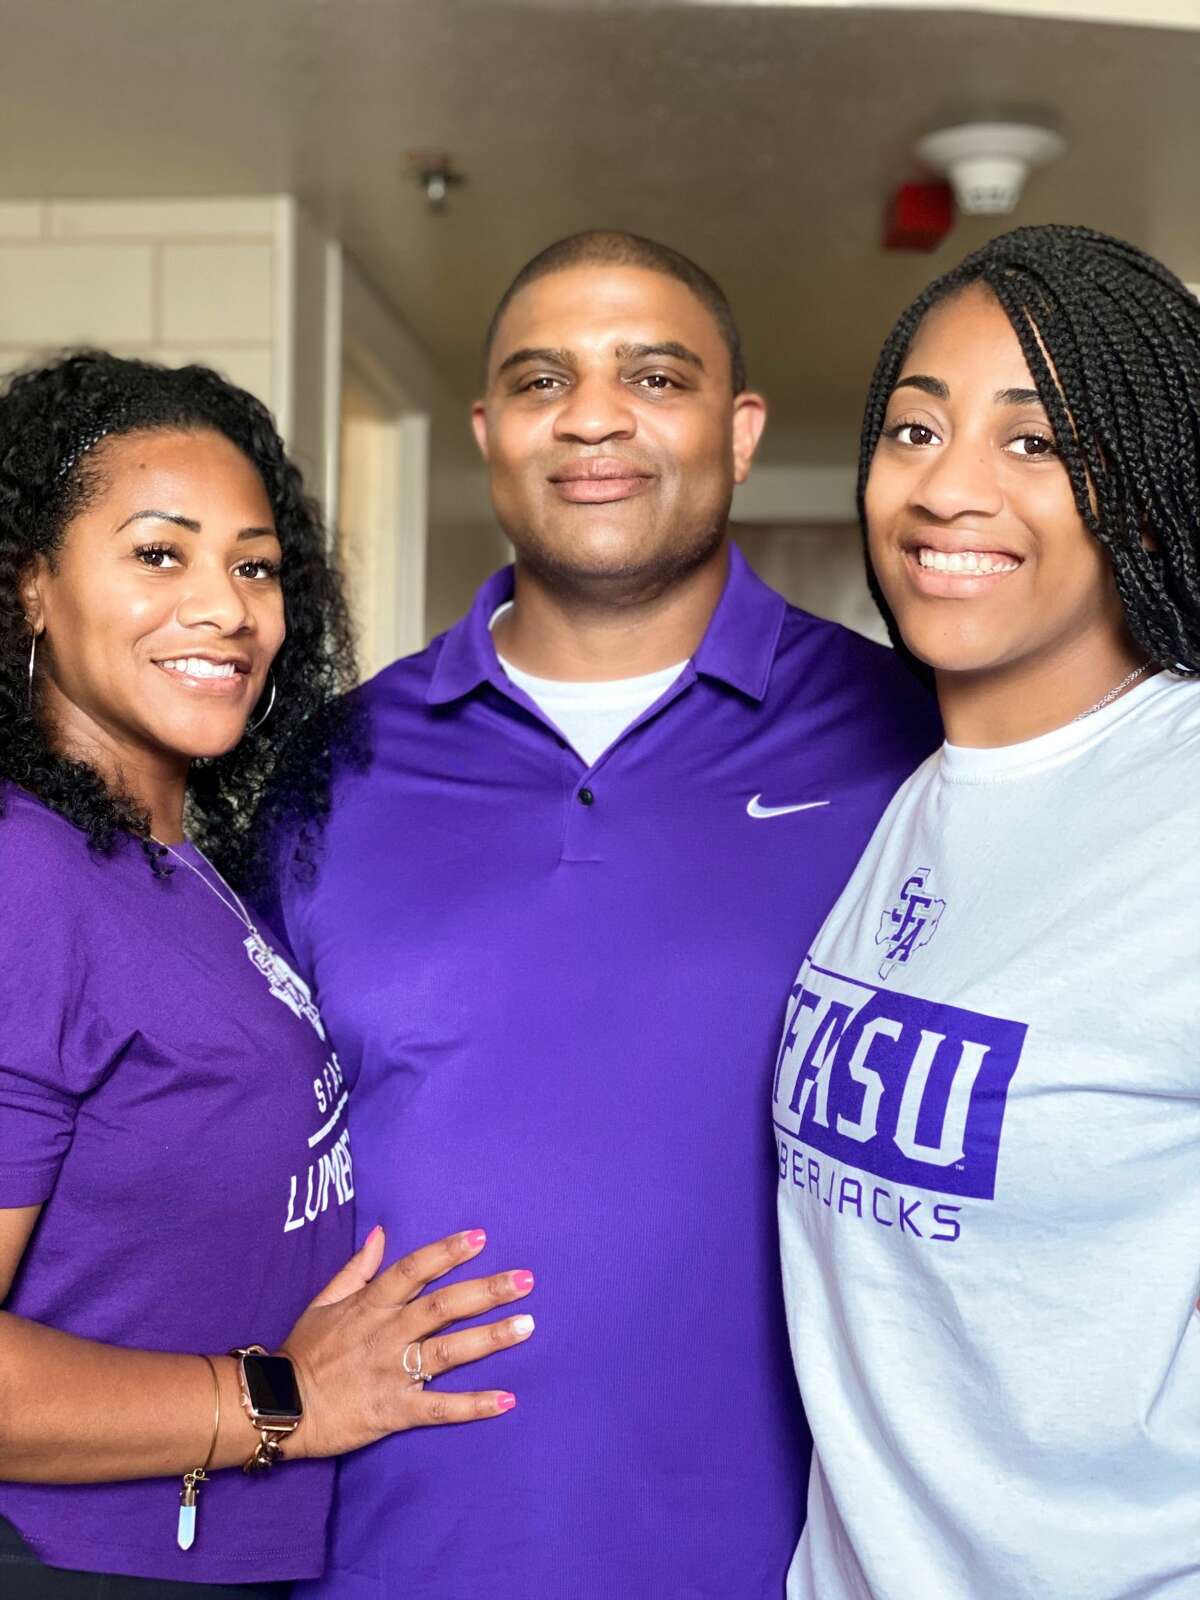 A Black cheerleader at Stephen F. Austin State University says she was awakened by police storming her dorm room on with guns drawn after a group of students made a false report that she had scissors and was threatening to stab people, according to the student's attorney, Randall Kallinen.